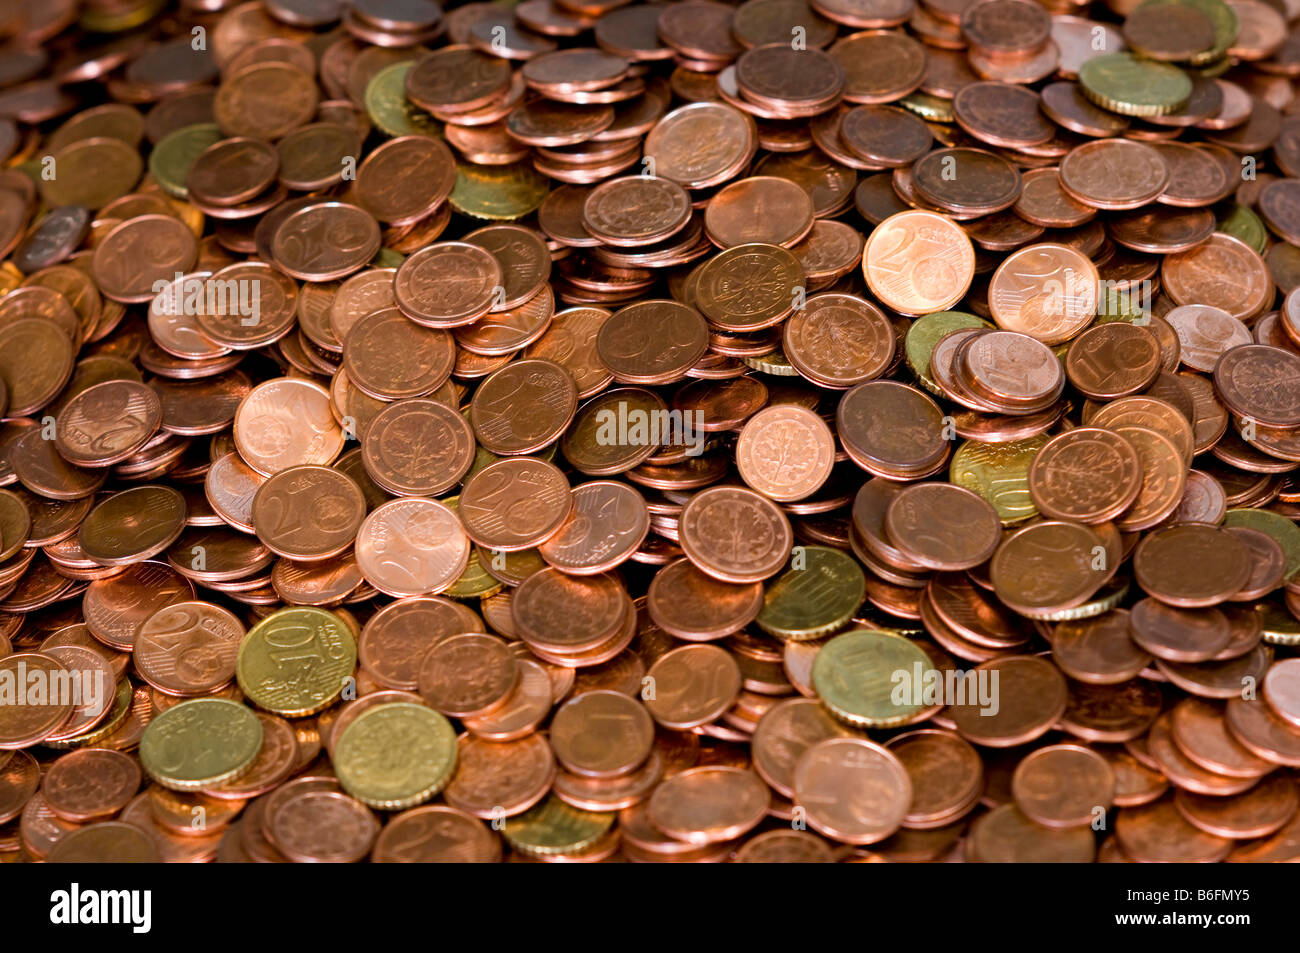 Change, cent coins Stock Photo